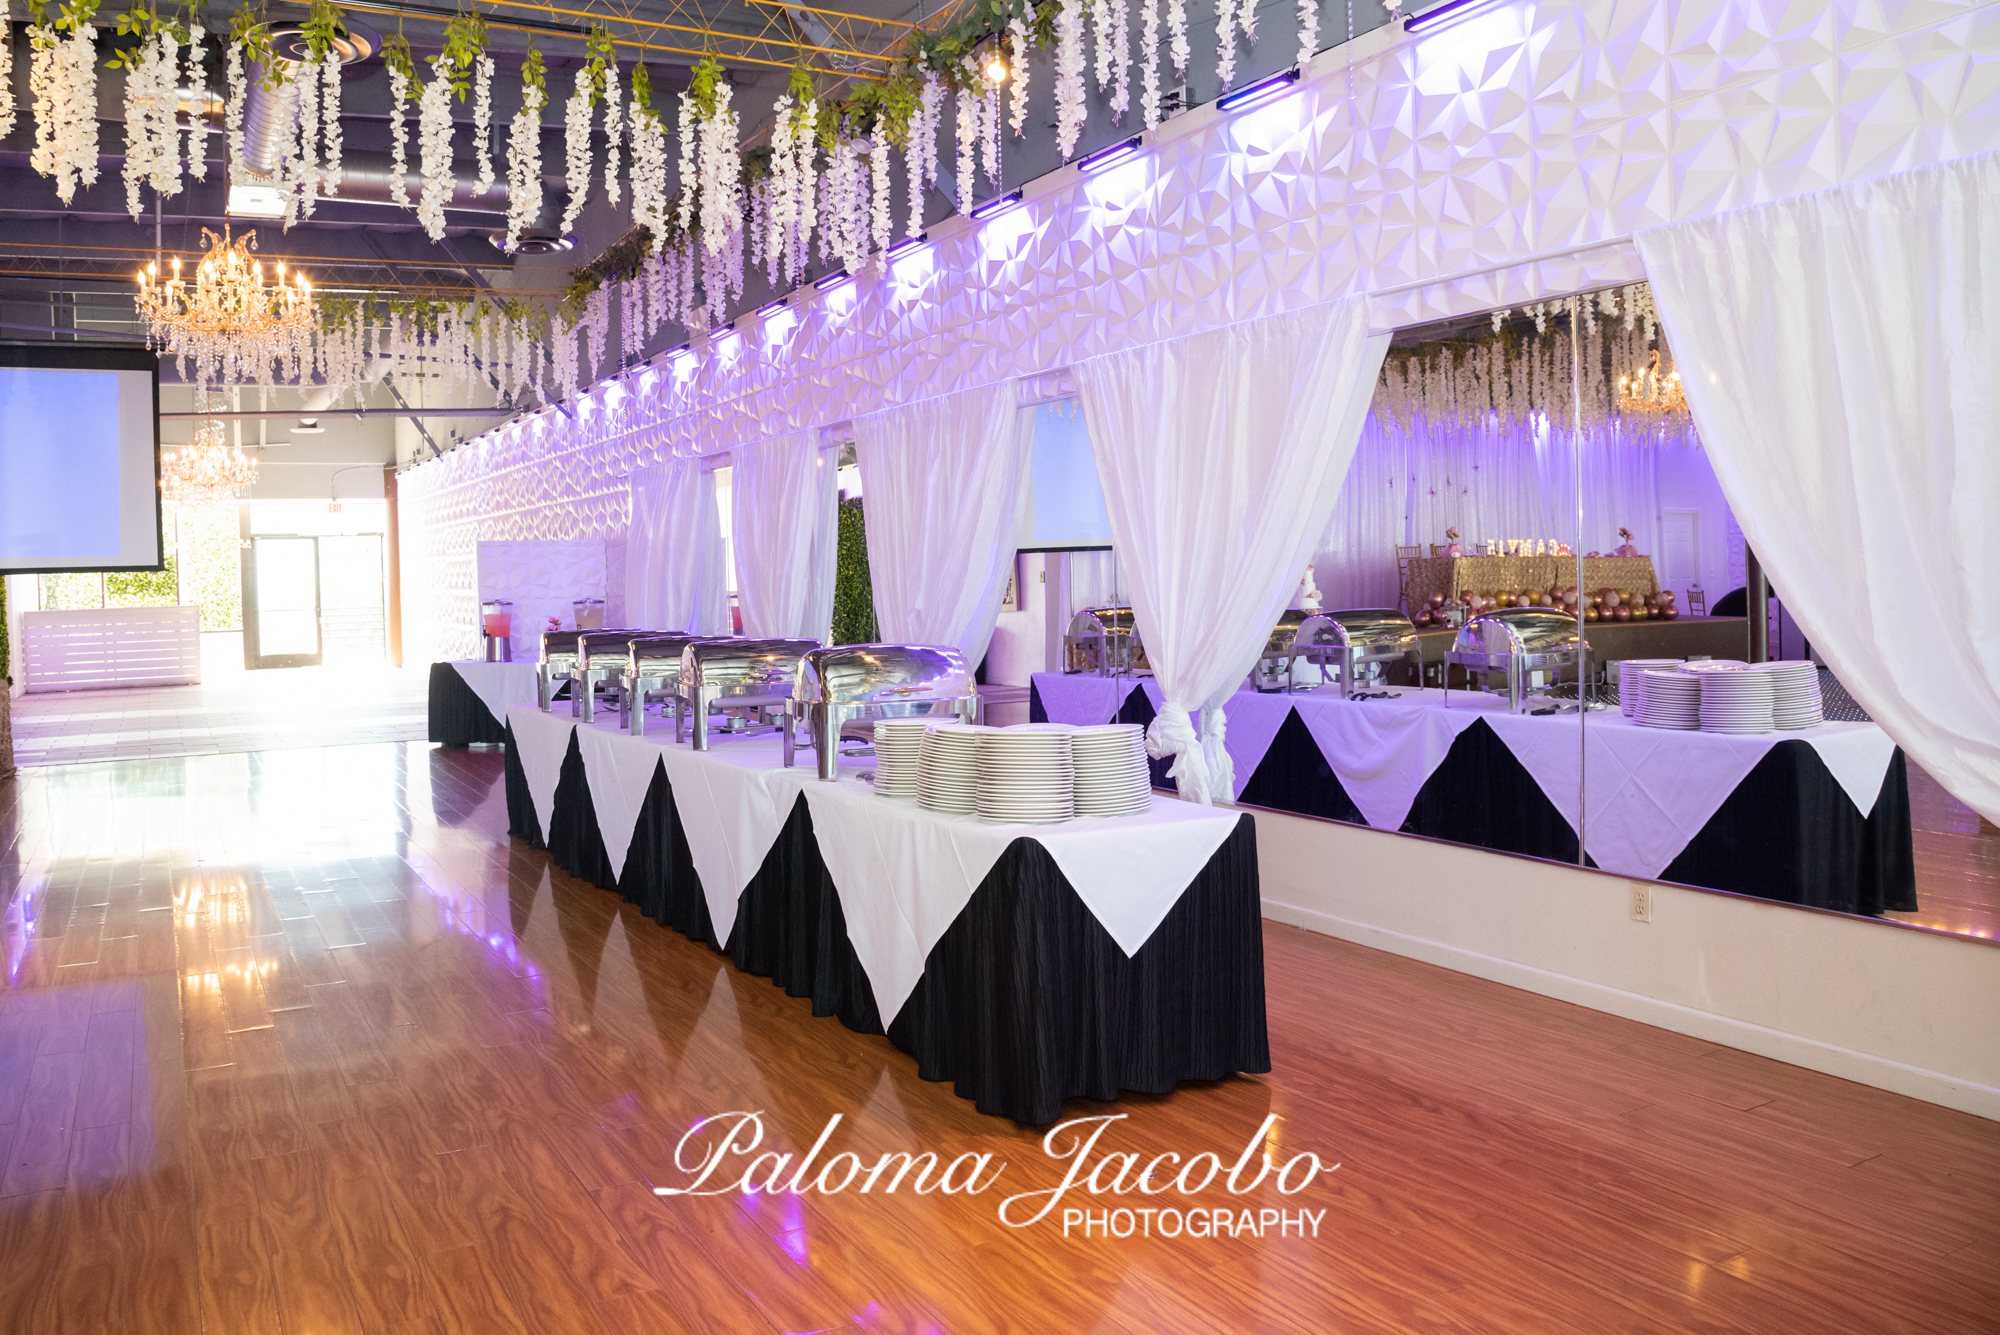 Quinceanera at Royal Banquet Hall by Paloma Jacobo Photography